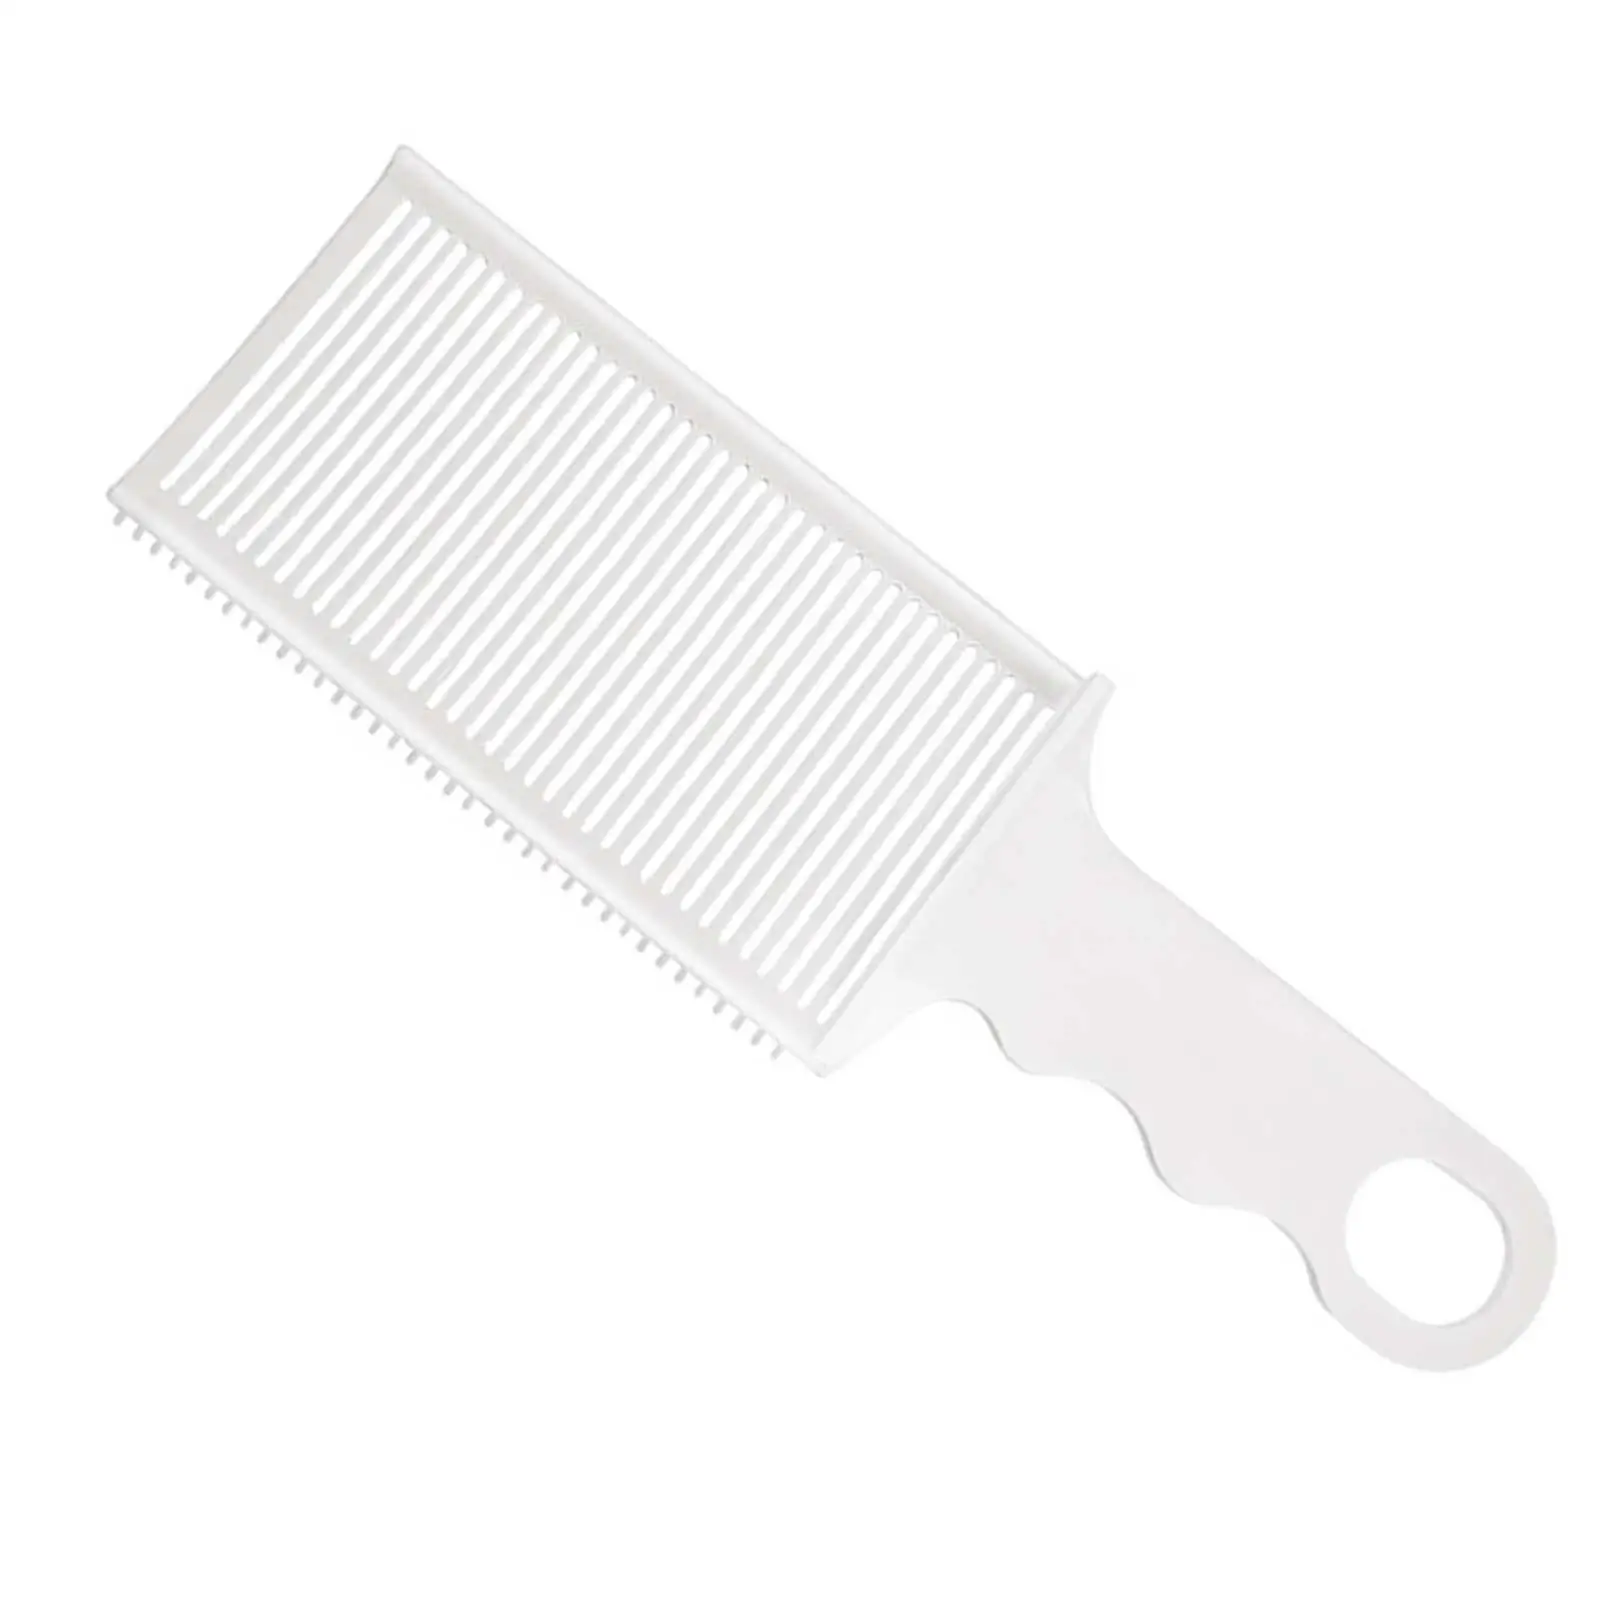 Fade Combs Professional Multipurpose Clipper Comb for Home Salon Hairdresser